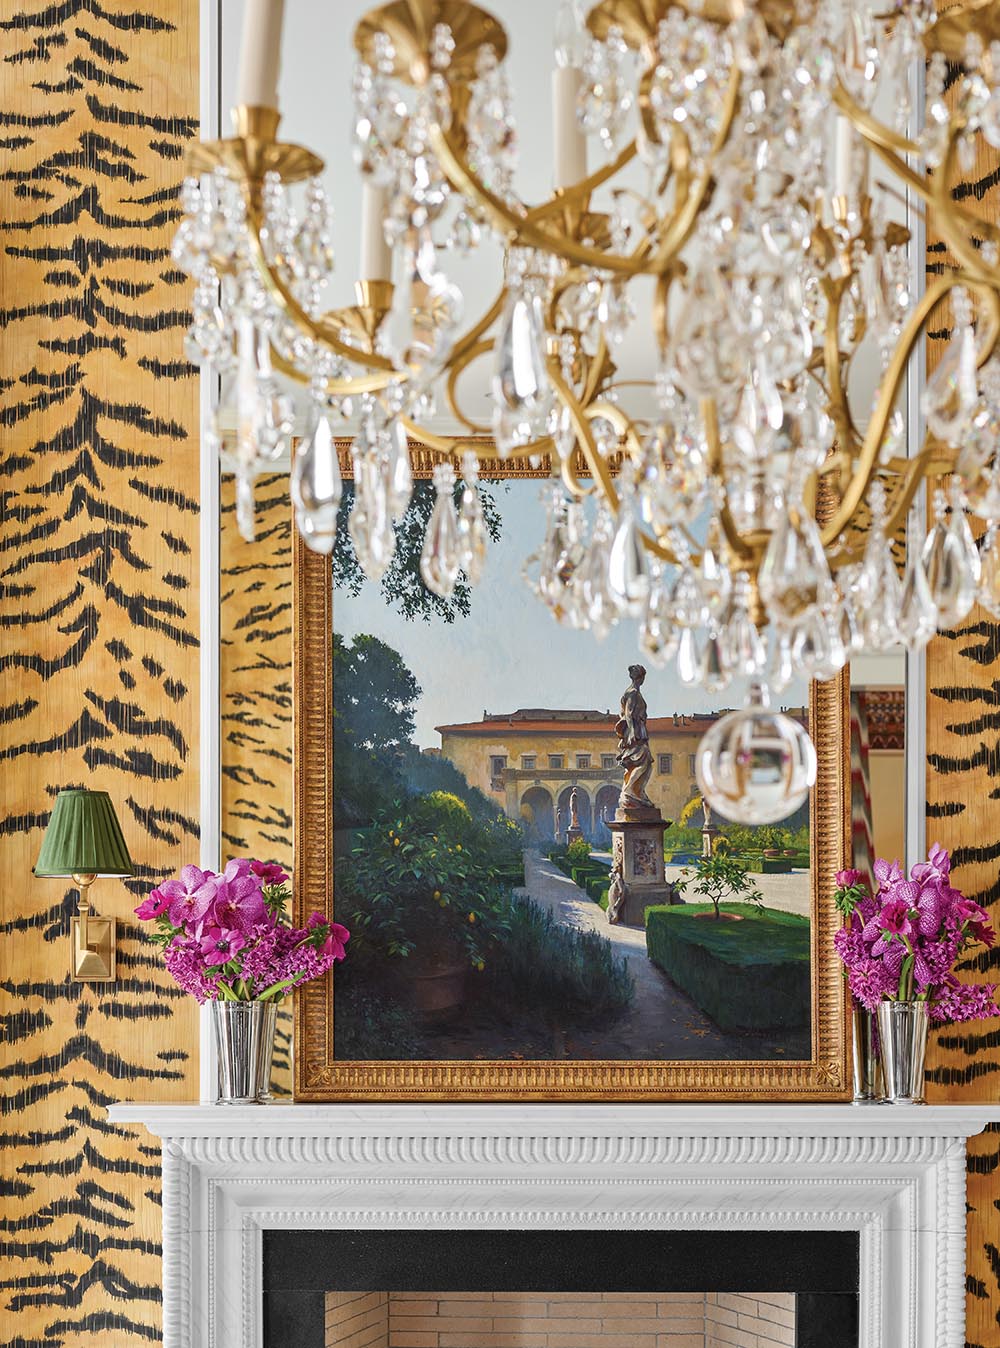 Bright gold and crystal chandelier in tiger-print dining room designed by Alexa Hampton.